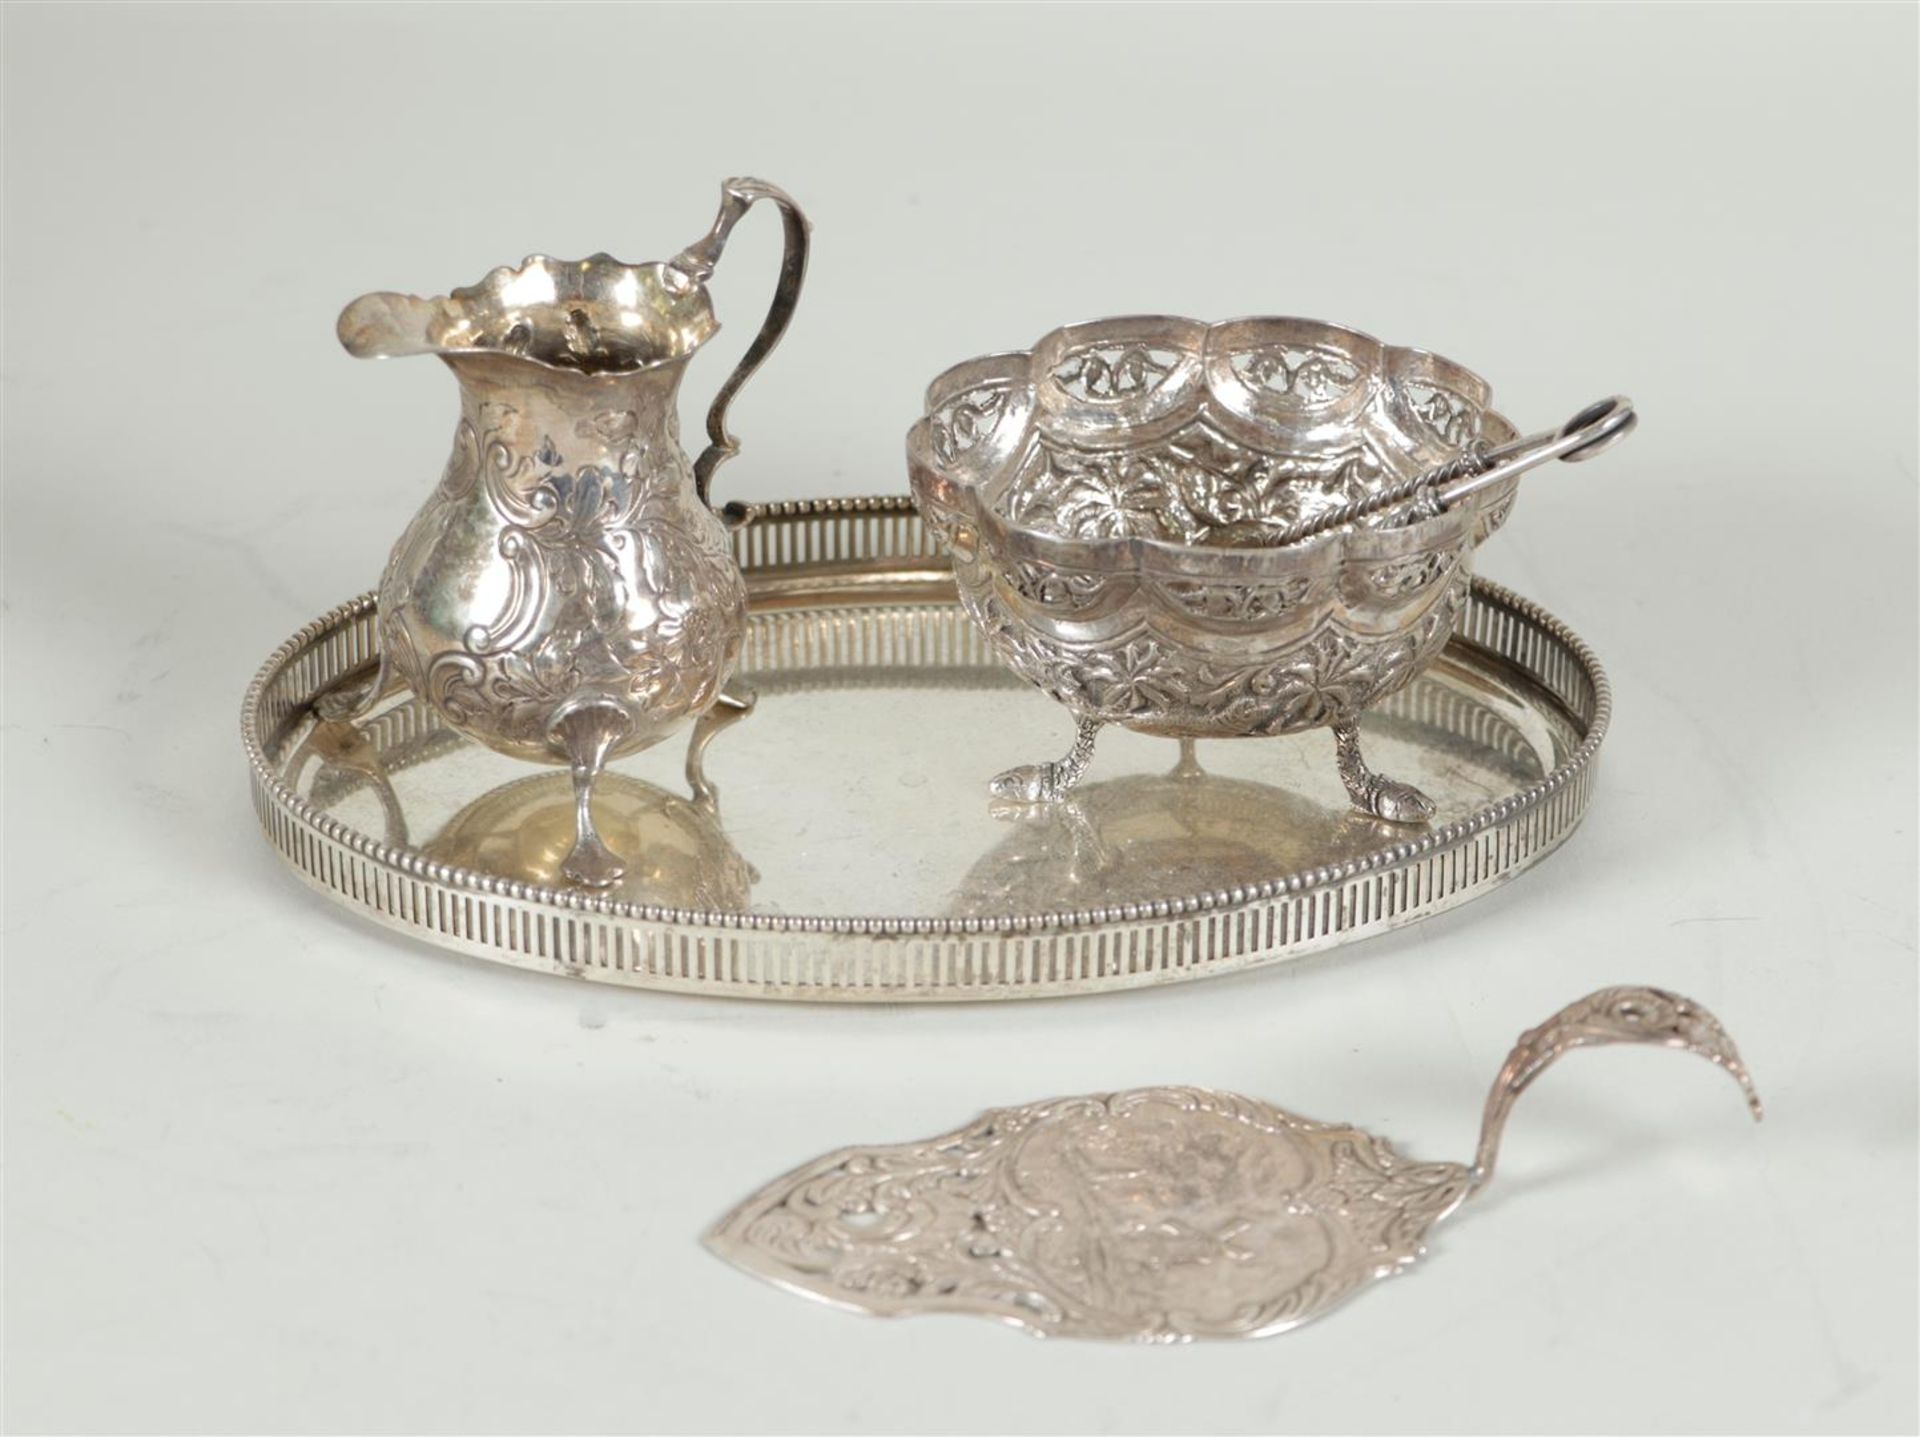 A silver cream set with lump tongs on a tray, plus a cake scoop.